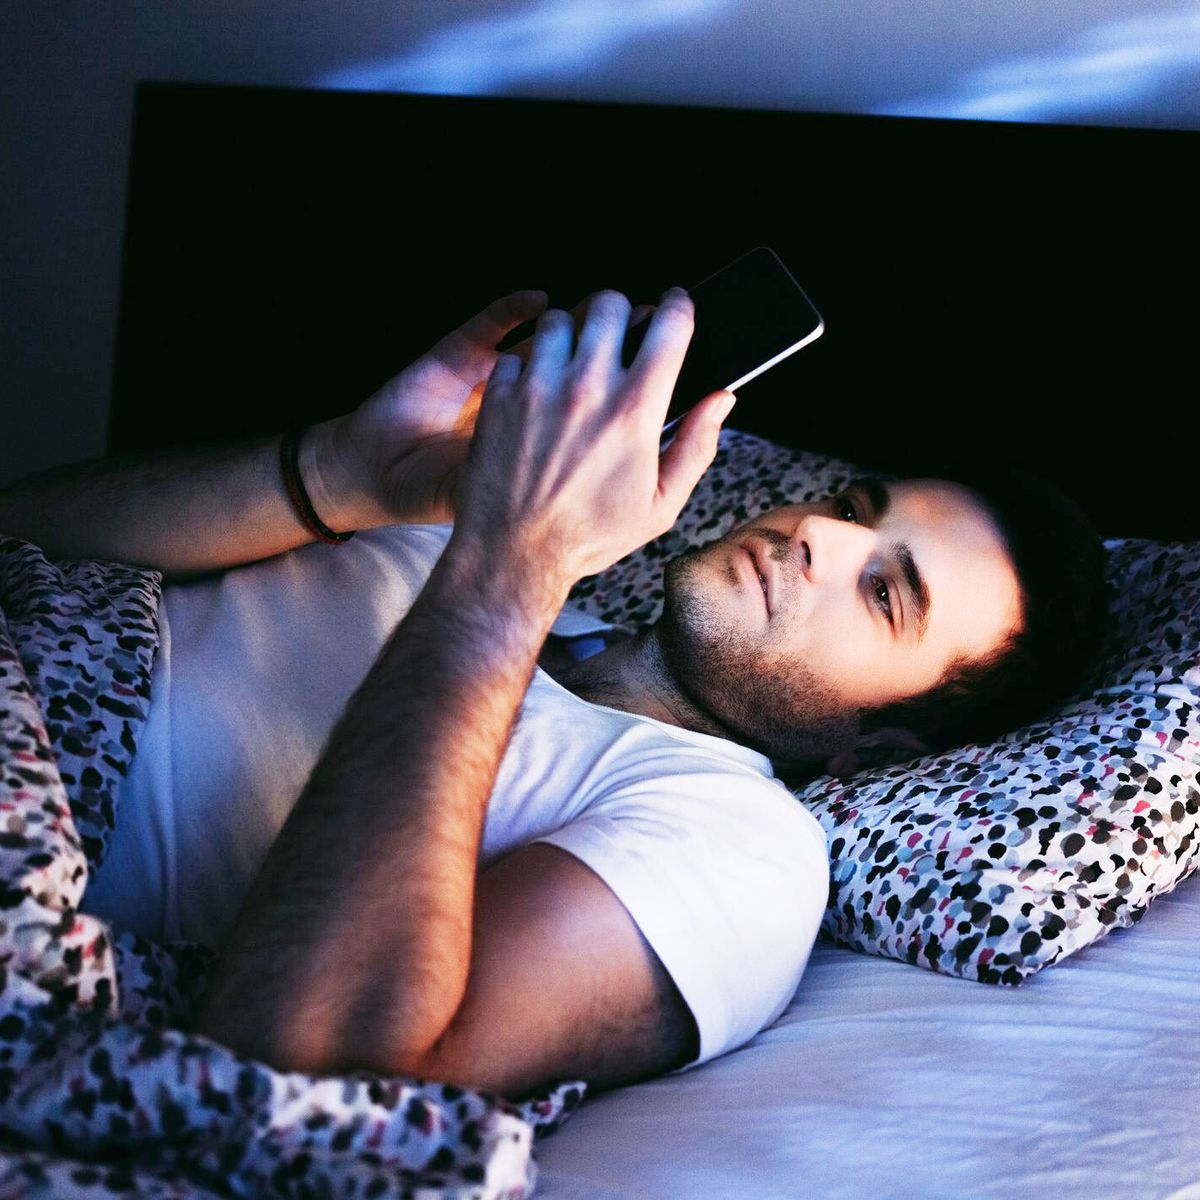 man on phone in bed